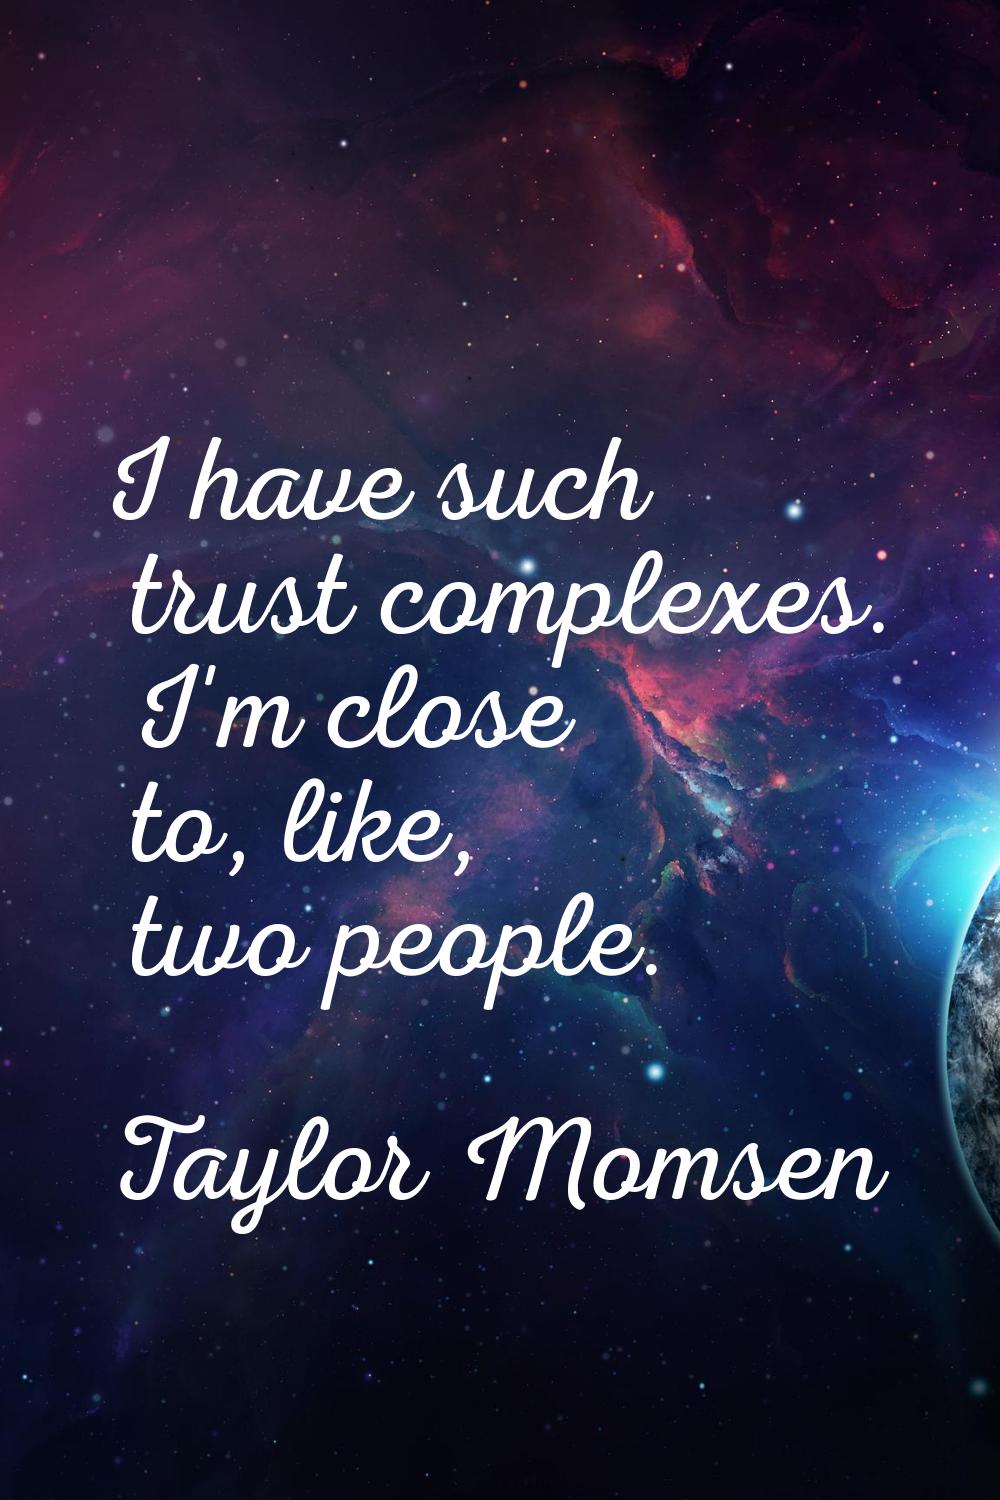 I have such trust complexes. I'm close to, like, two people.